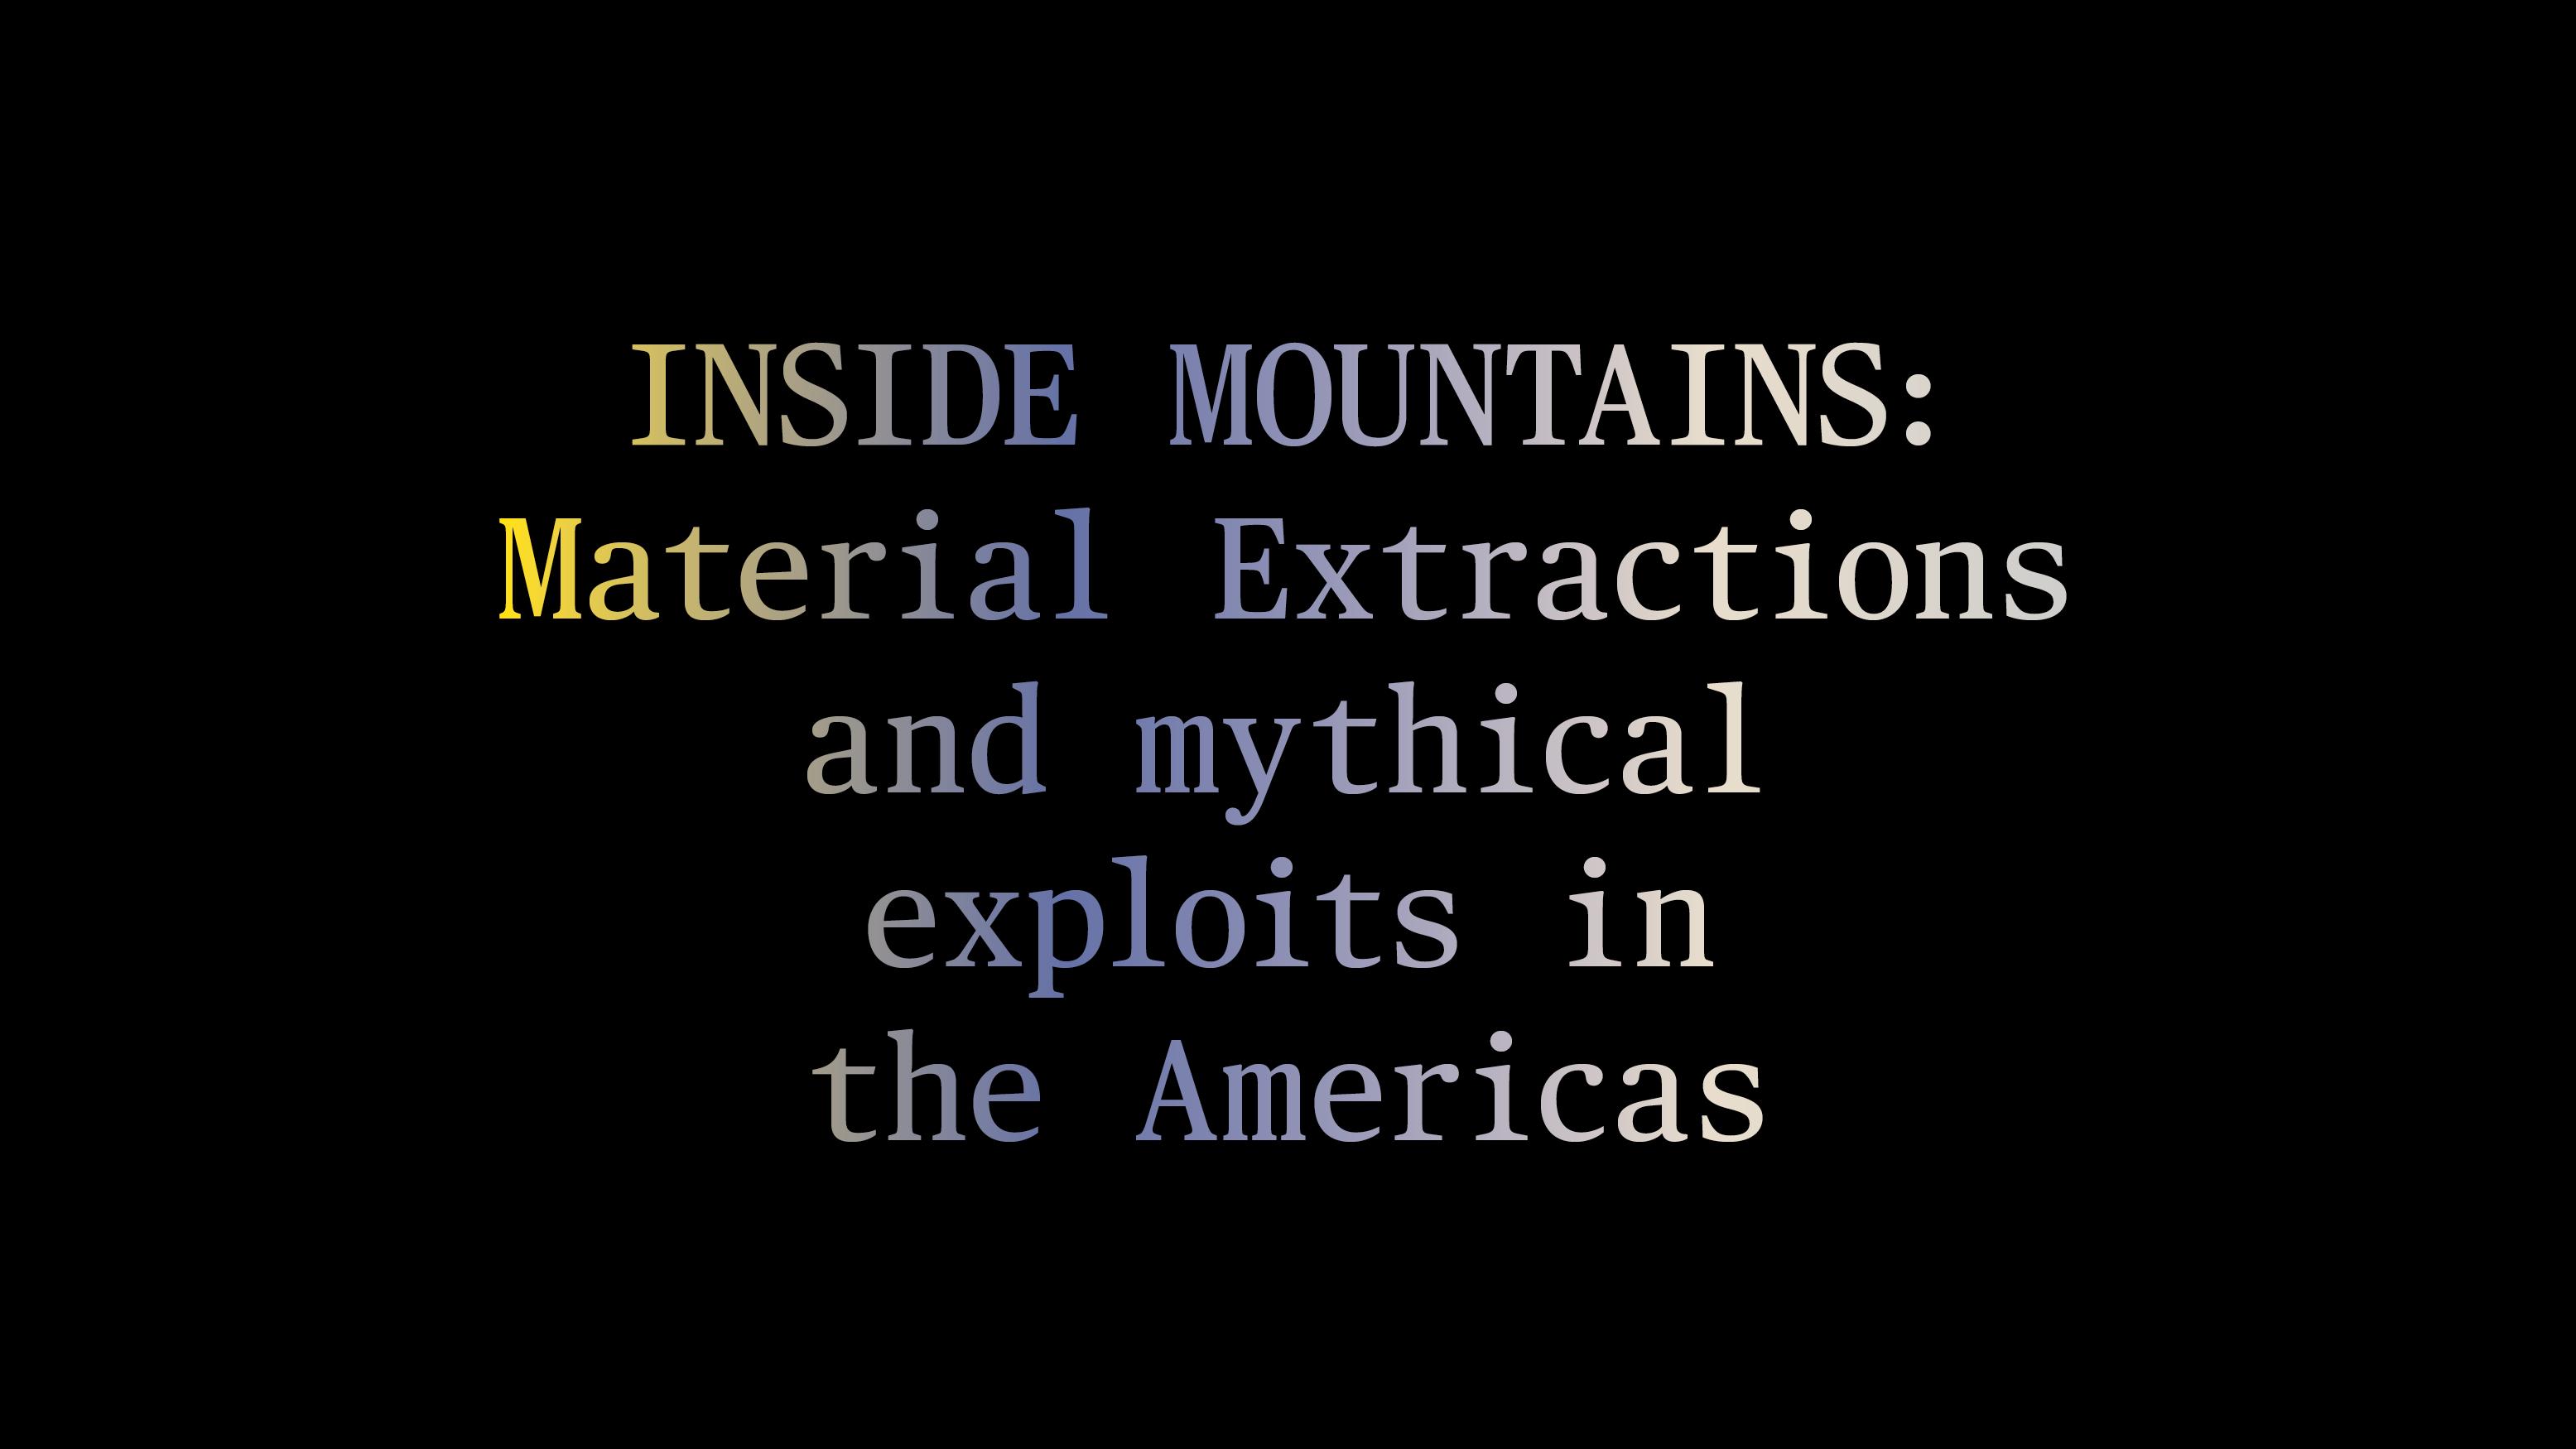 ZIAS LECTURE SERIES: INSIDE MOUNTAINS - Material Extractions and mythical exploits in the Americas